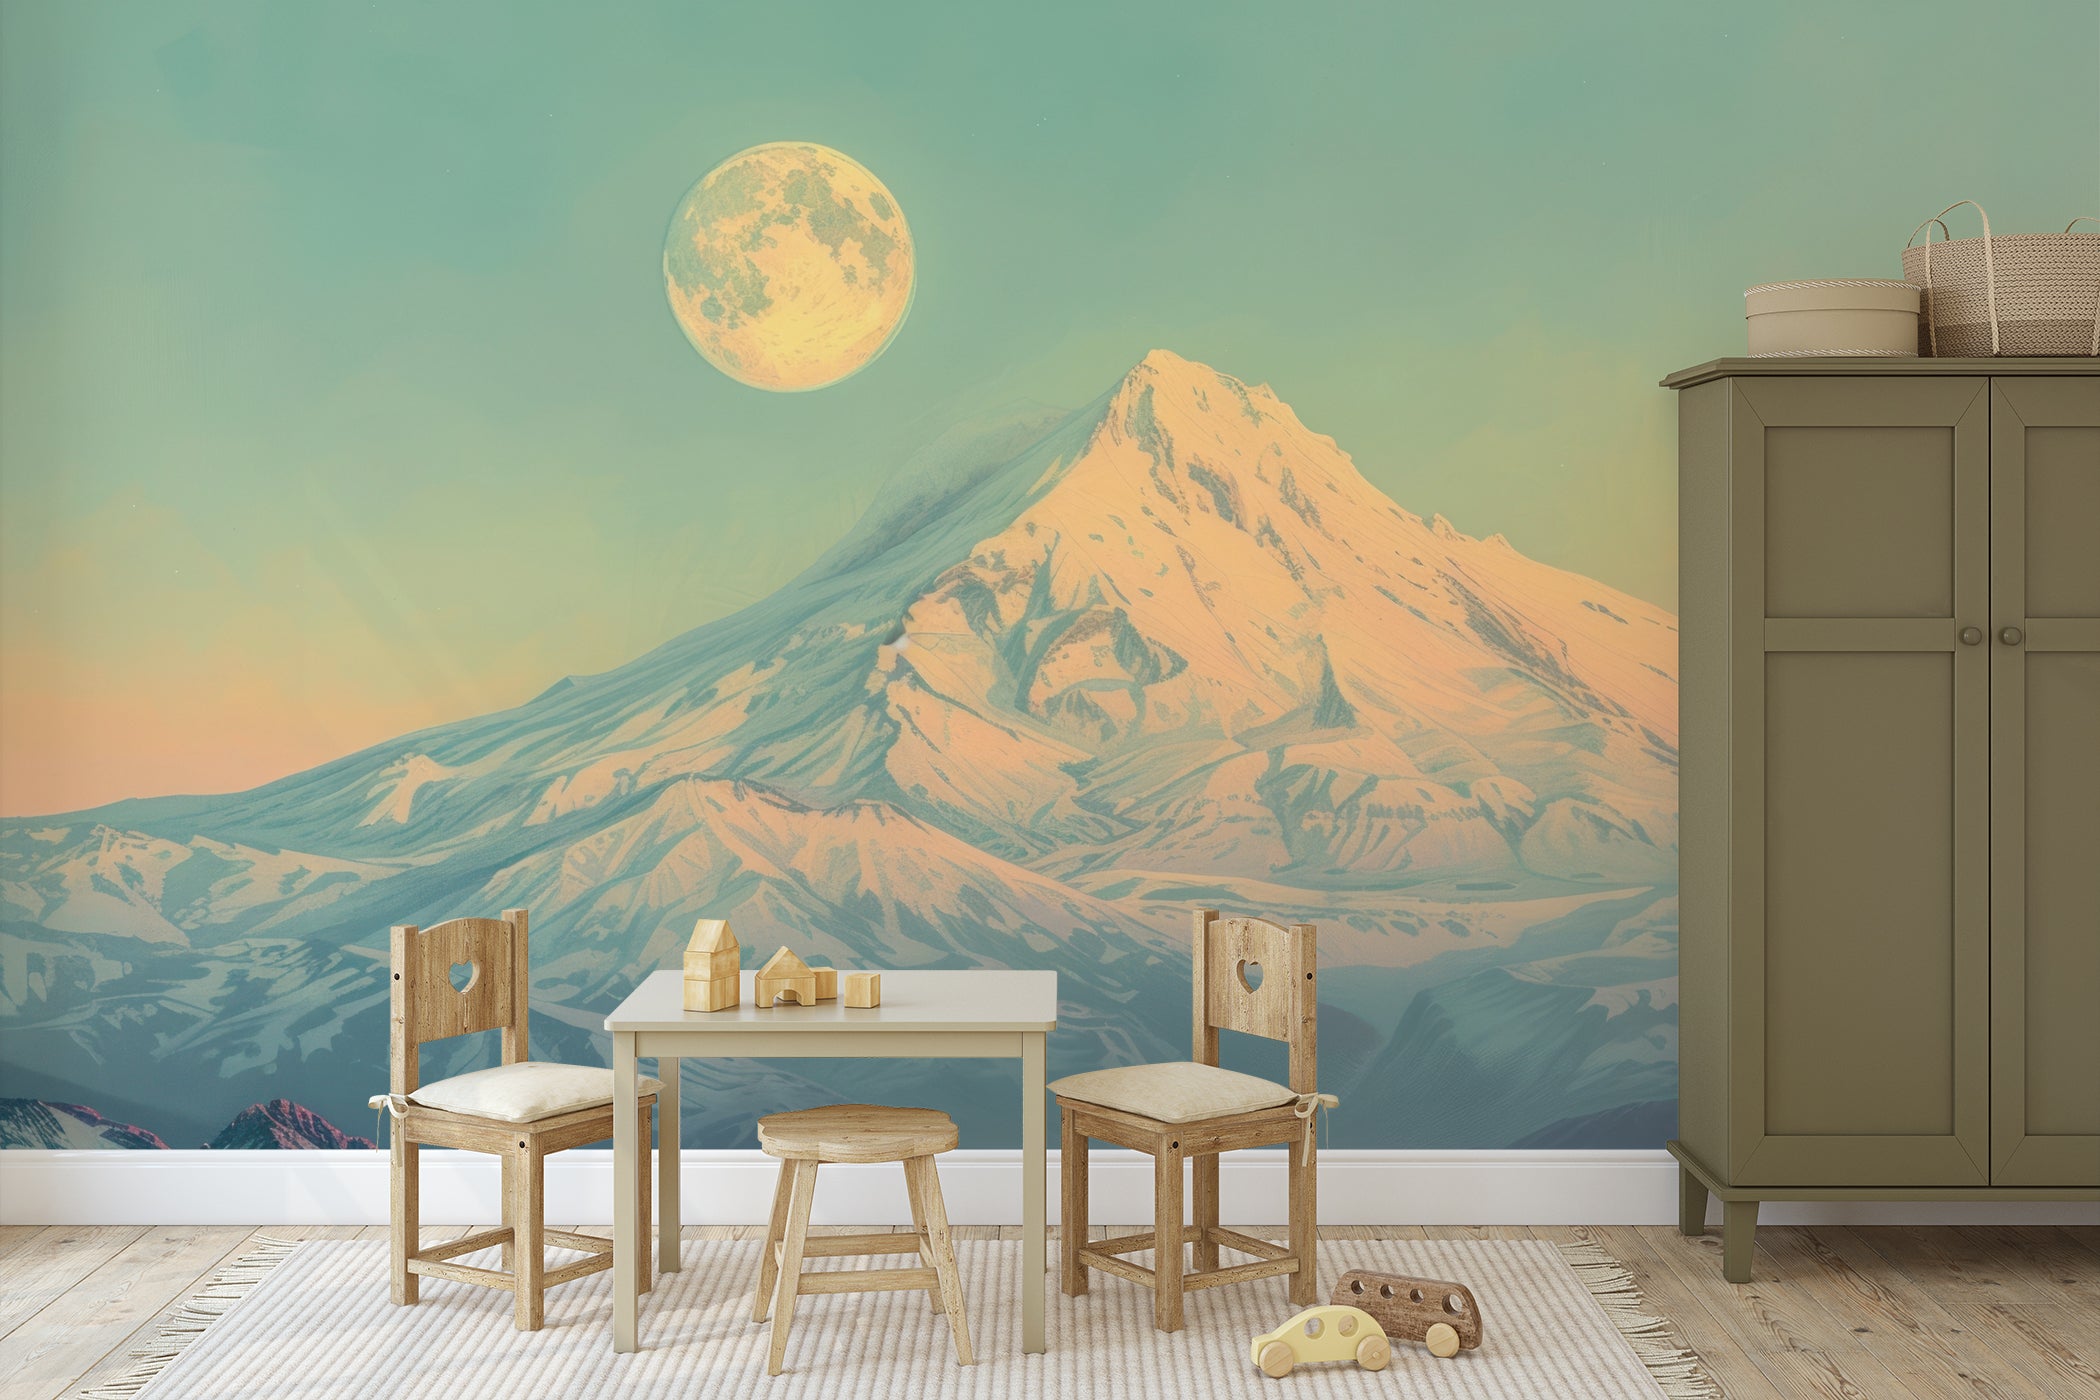 "Artistic depiction of an alpine scene with a full moon illuminating the snowy mountains."